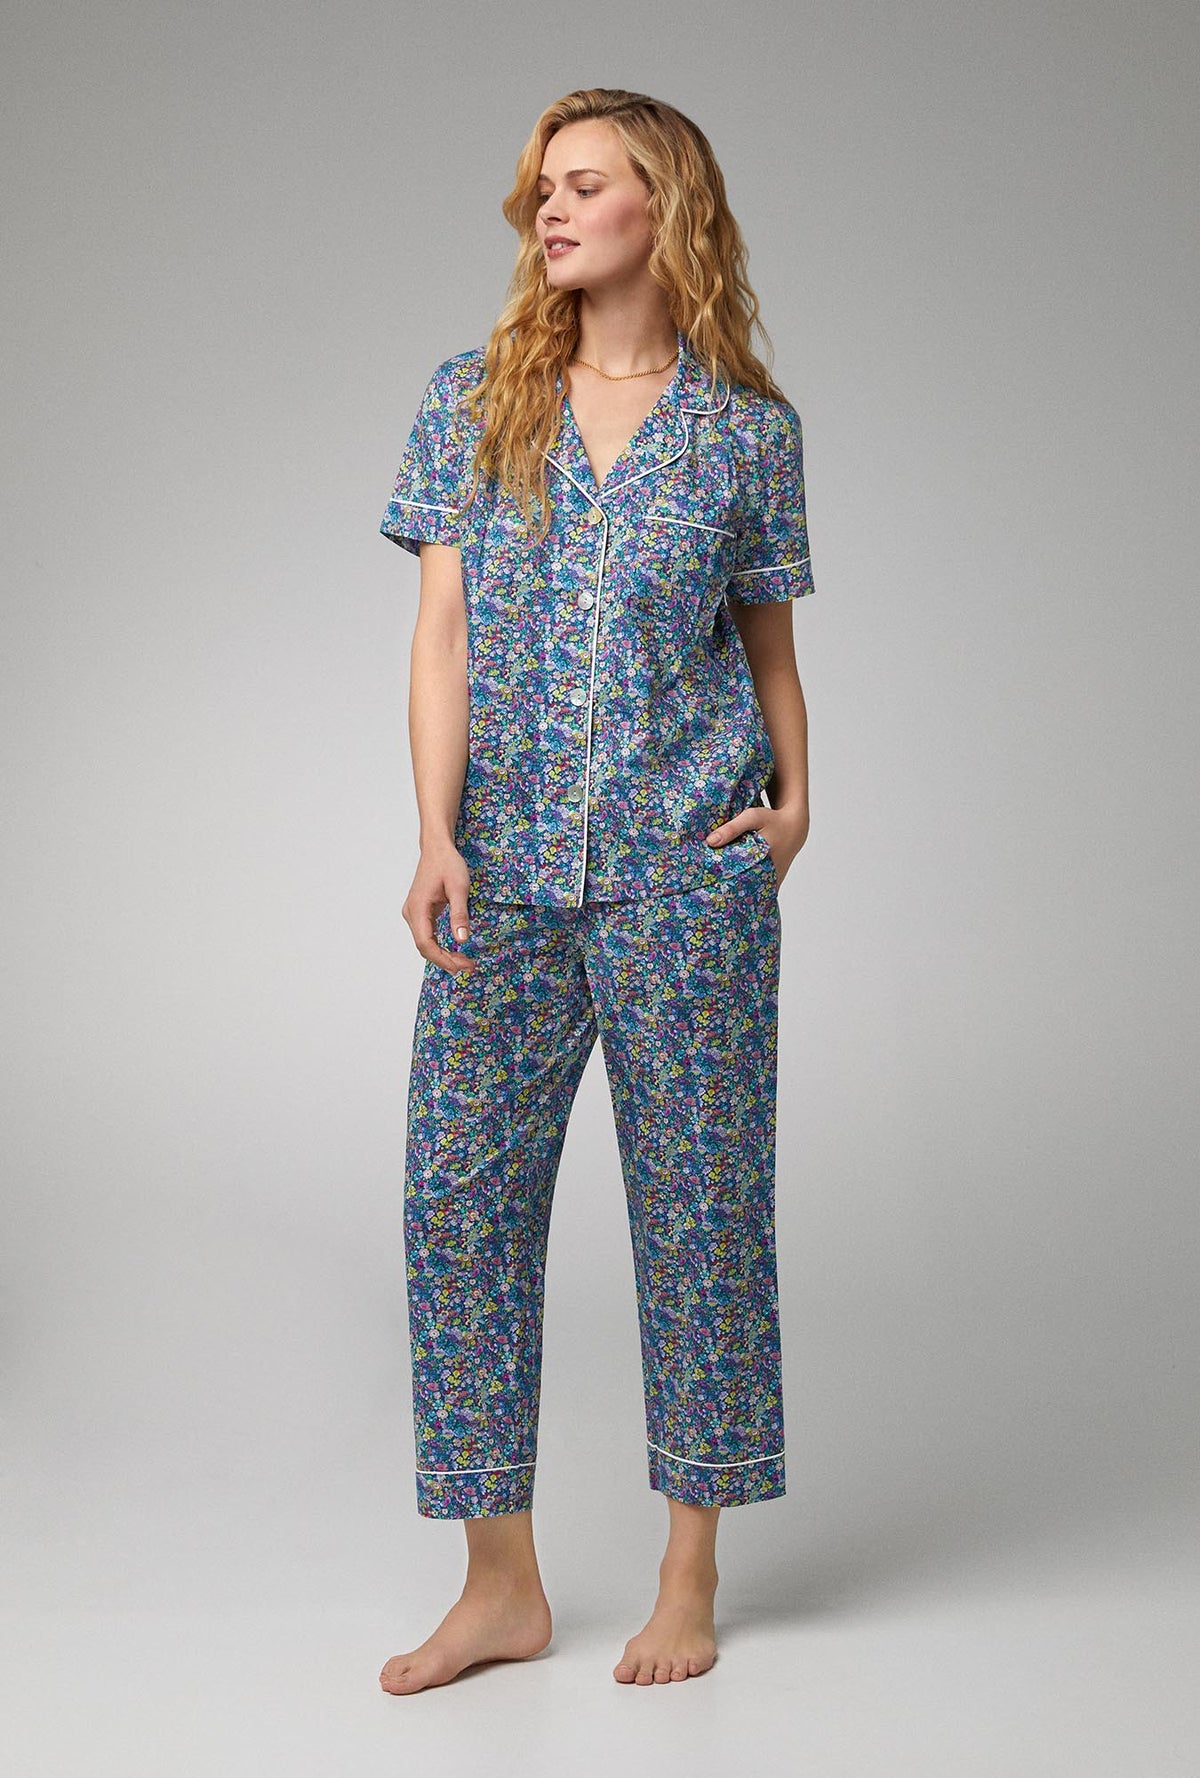 A lady wearing short sleeve classic cropped pj set with classic garden print